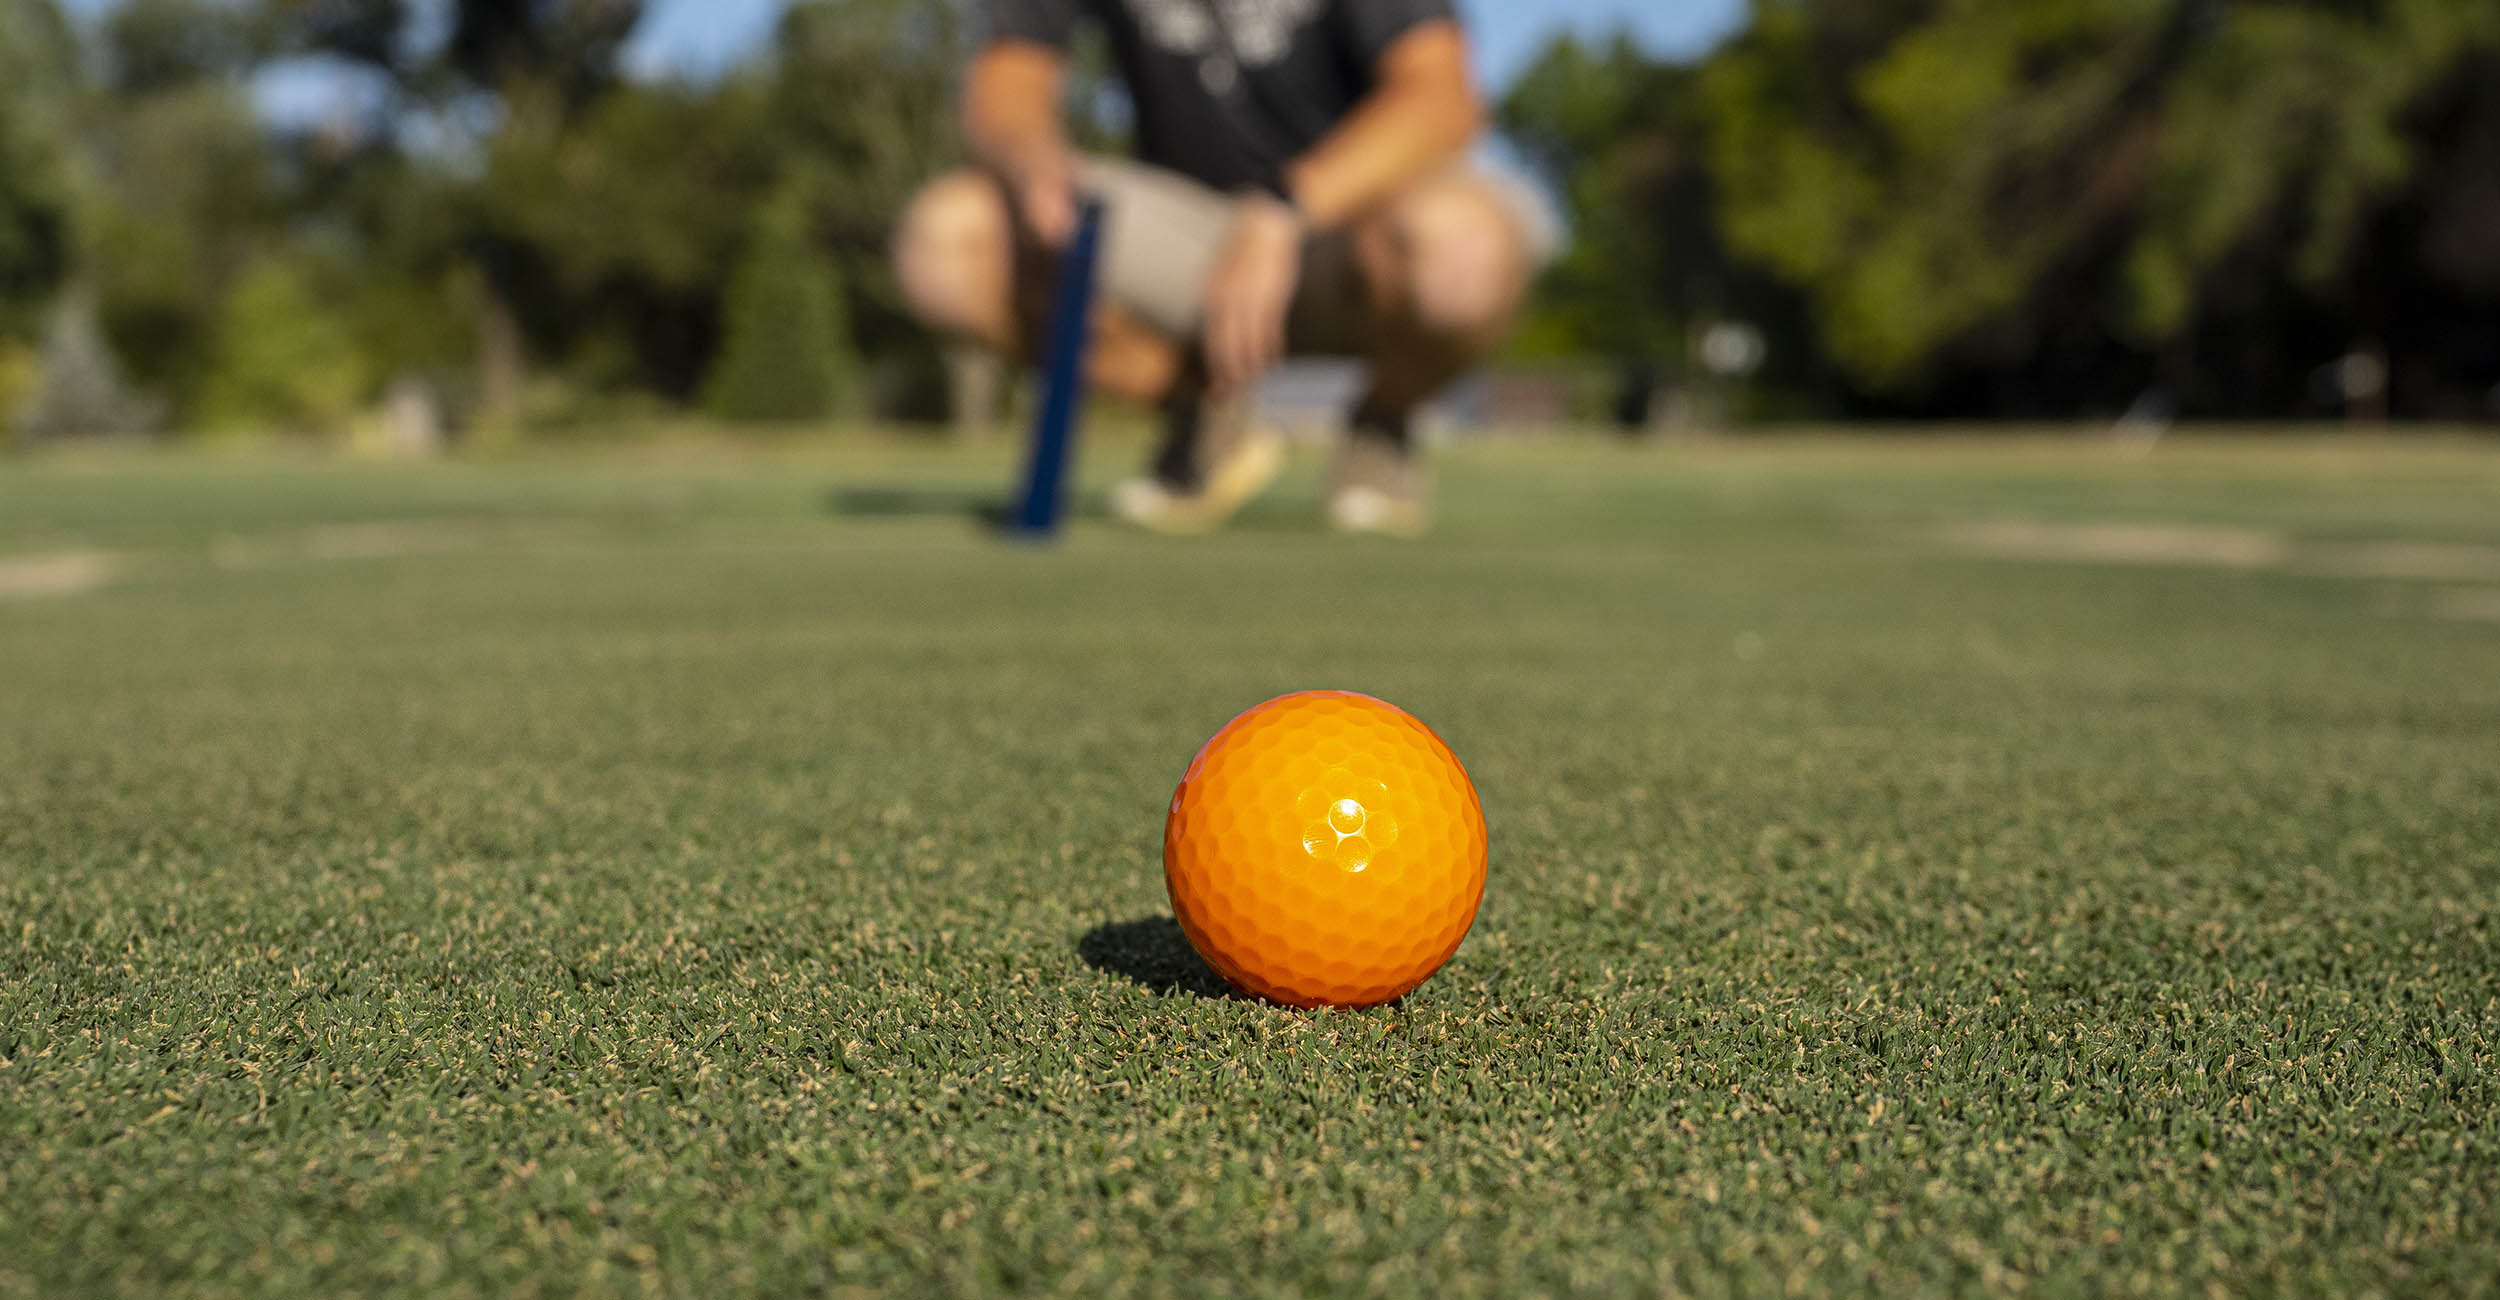 OSU Announces Two New Turfgrass Varieties